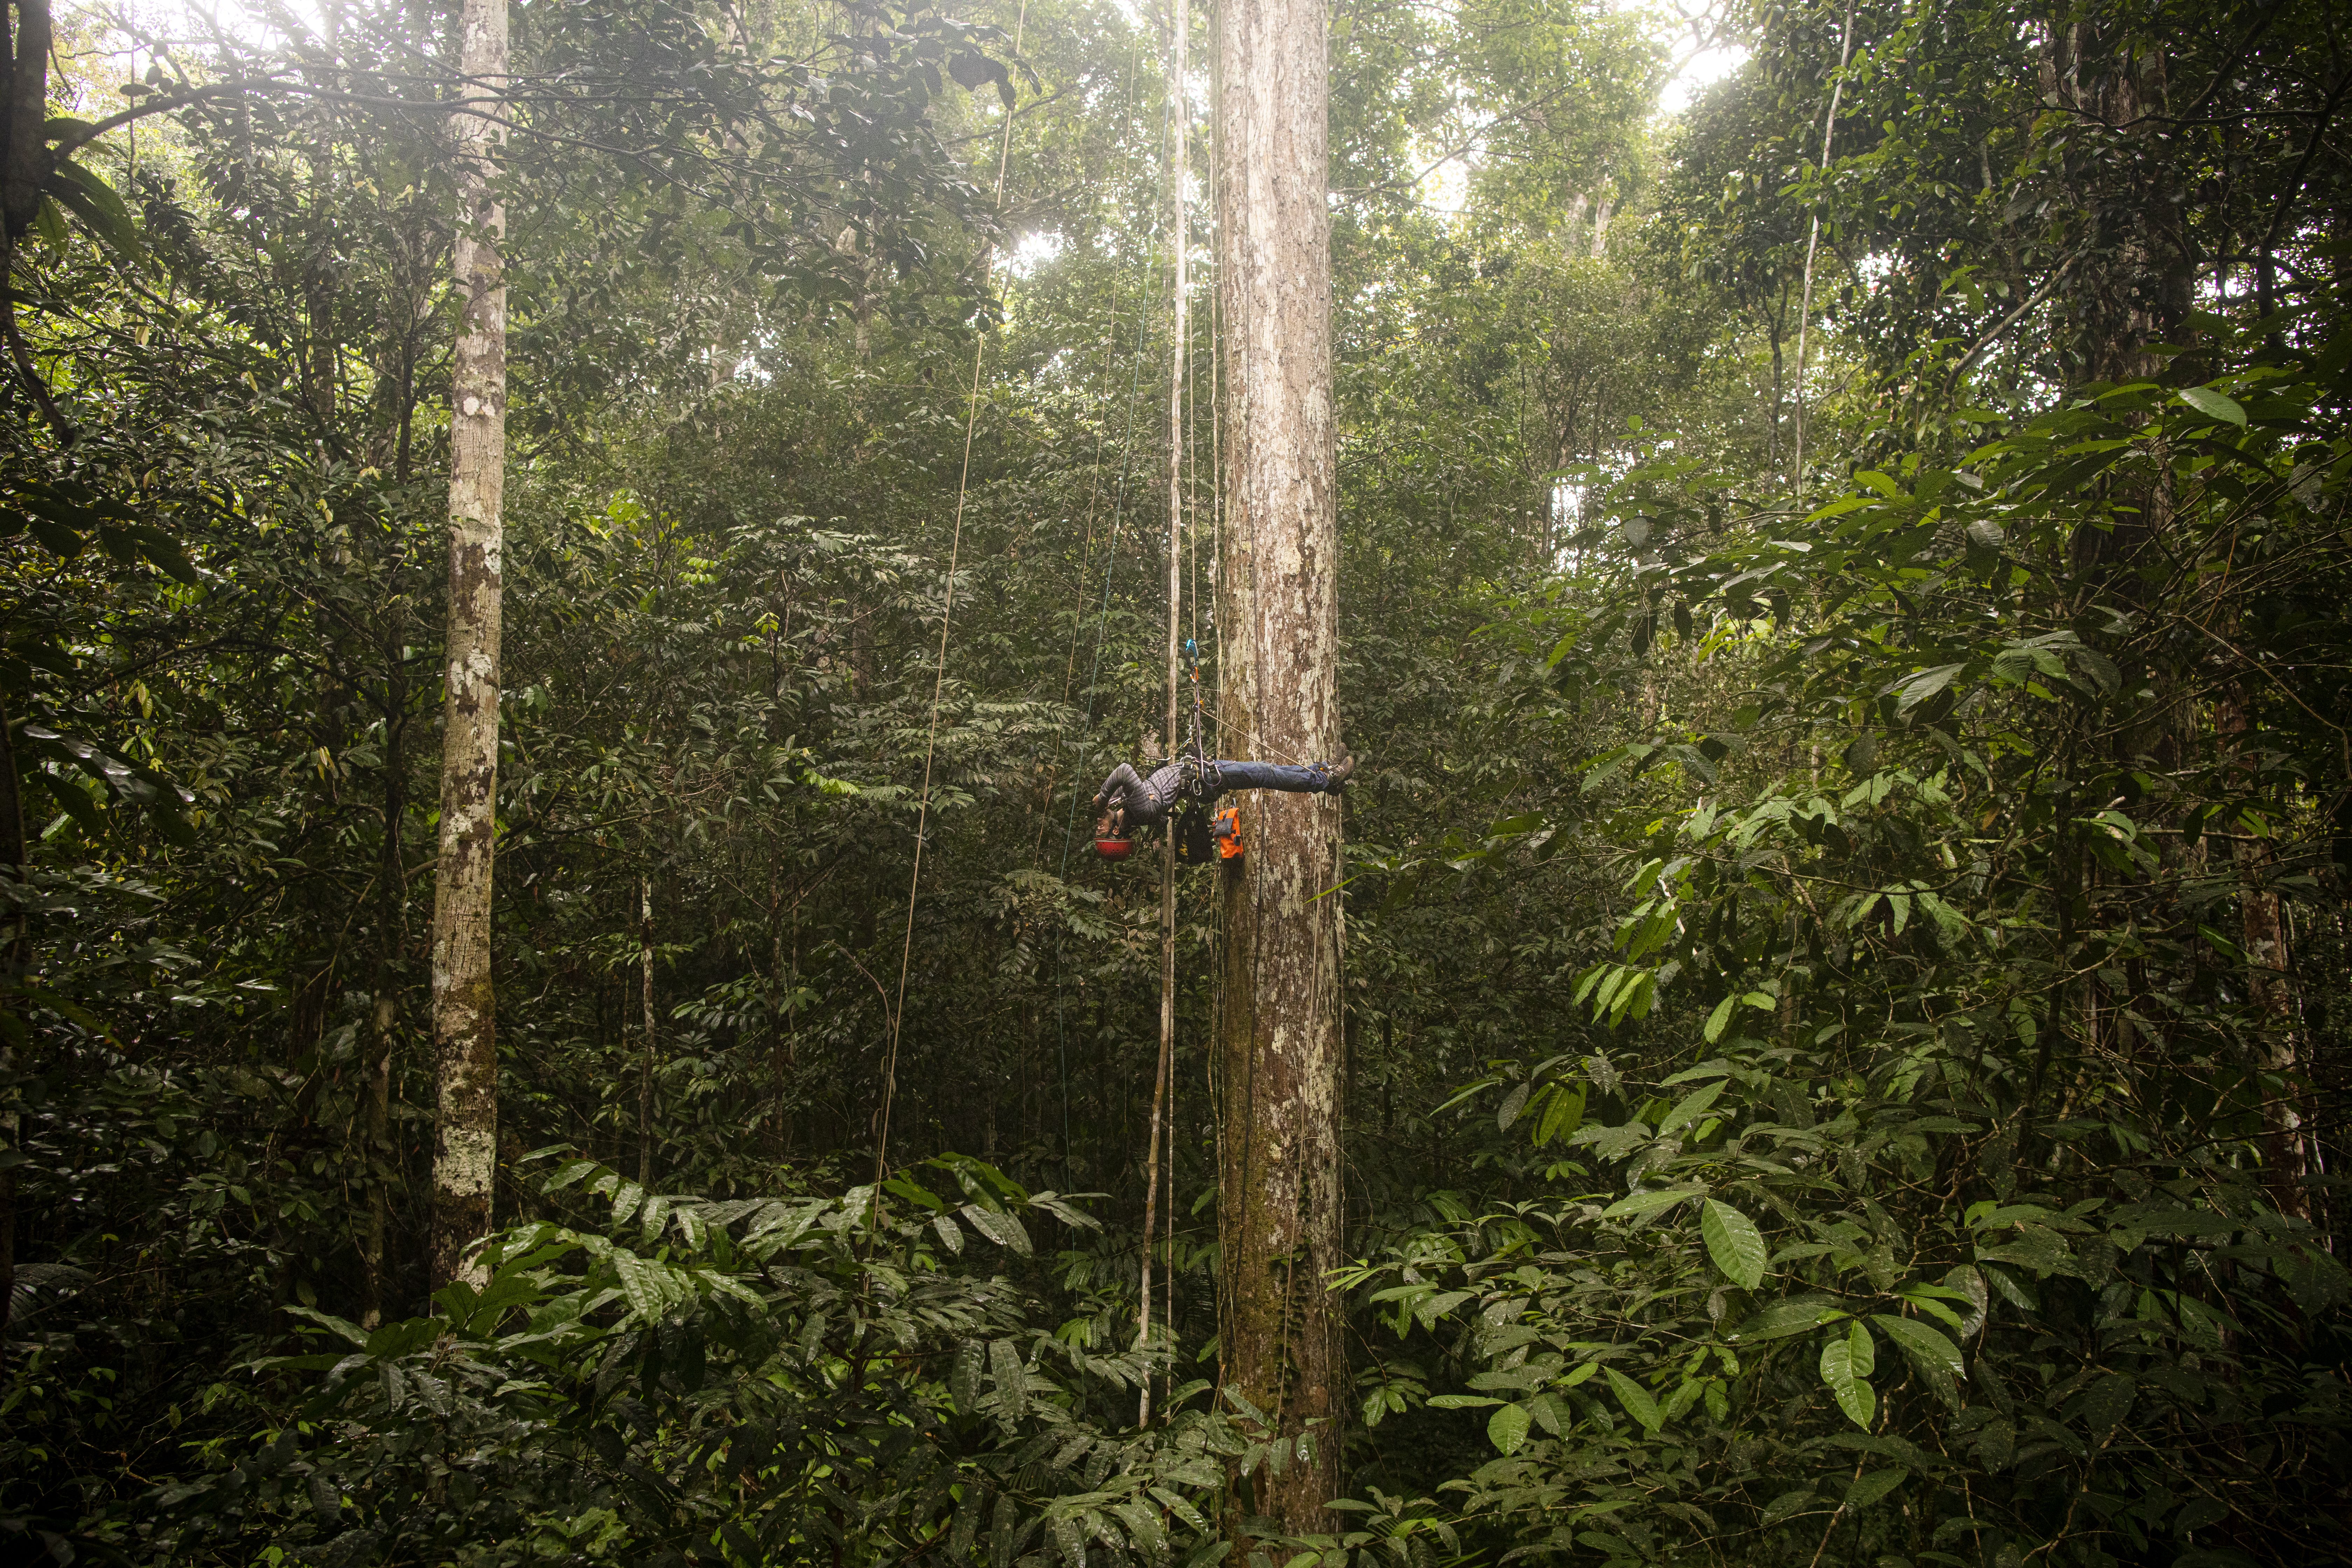 Climbing towers and trees, scientists at ATTO are building a better understanding of how the Amazon rainforest benefits the world. Image by Victor Moriyama. Brazil, 2019.